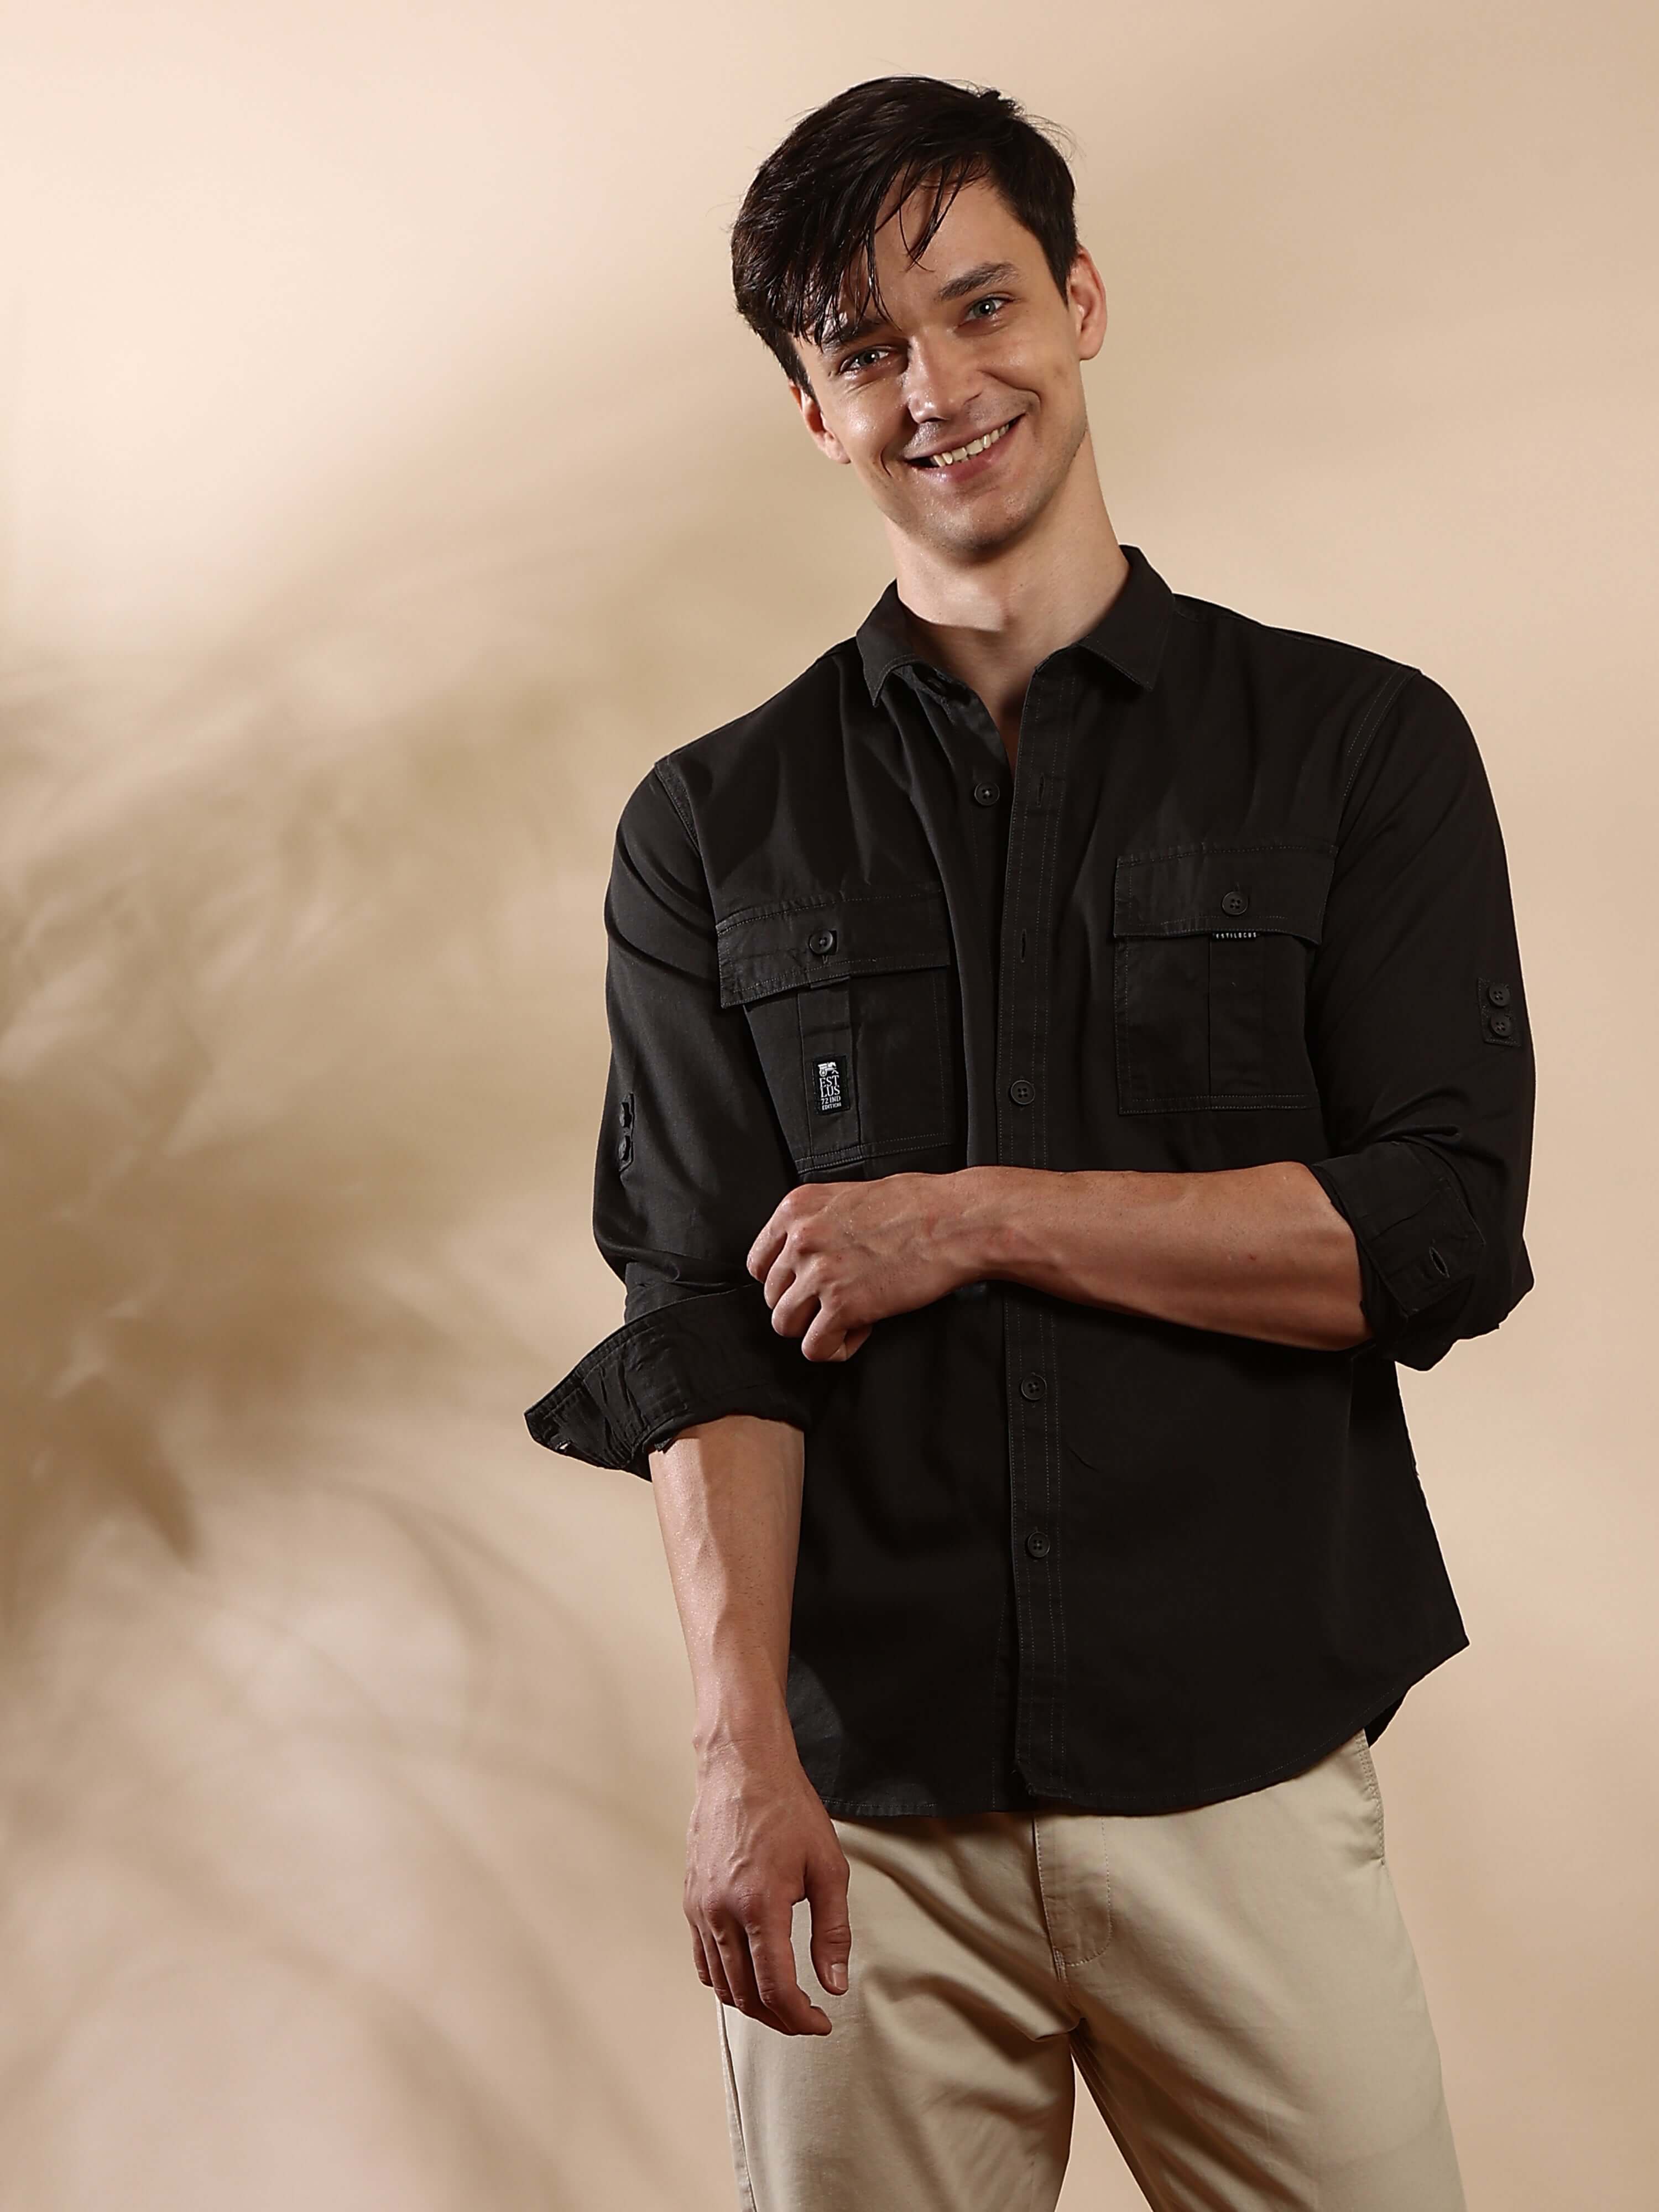 Charcoal grey Cargo casual full sleeve shirt shop online at Estilocus. • 100% PREMIUM COTTON • Full-sleeve solid shirt• Cut and sew placket• Regular collar• Double button round cuffs.• Double pocket with flap• Curved hemline• Finest quality sewing with al